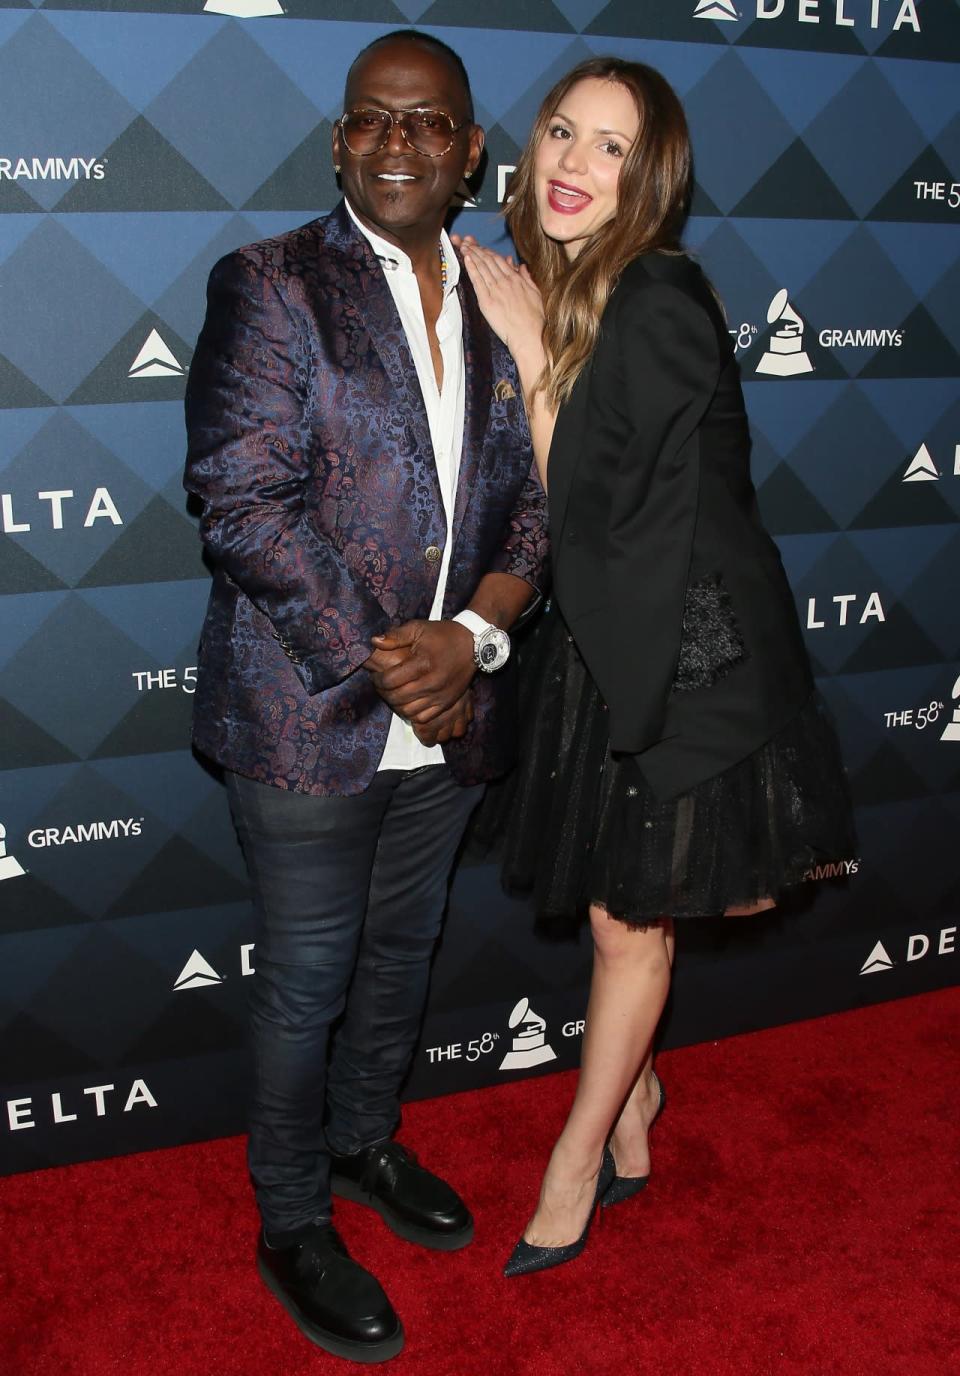 Katharine McPhee and Randy Jackson attend the Delta Air Lines celebrates 2016 GRAMMY Weekend with ‘Sites and Sounds’ private performance with Leon Bridges on February 12, 2016 in Los Angeles. Photo by JB Lacroix/WireImage.